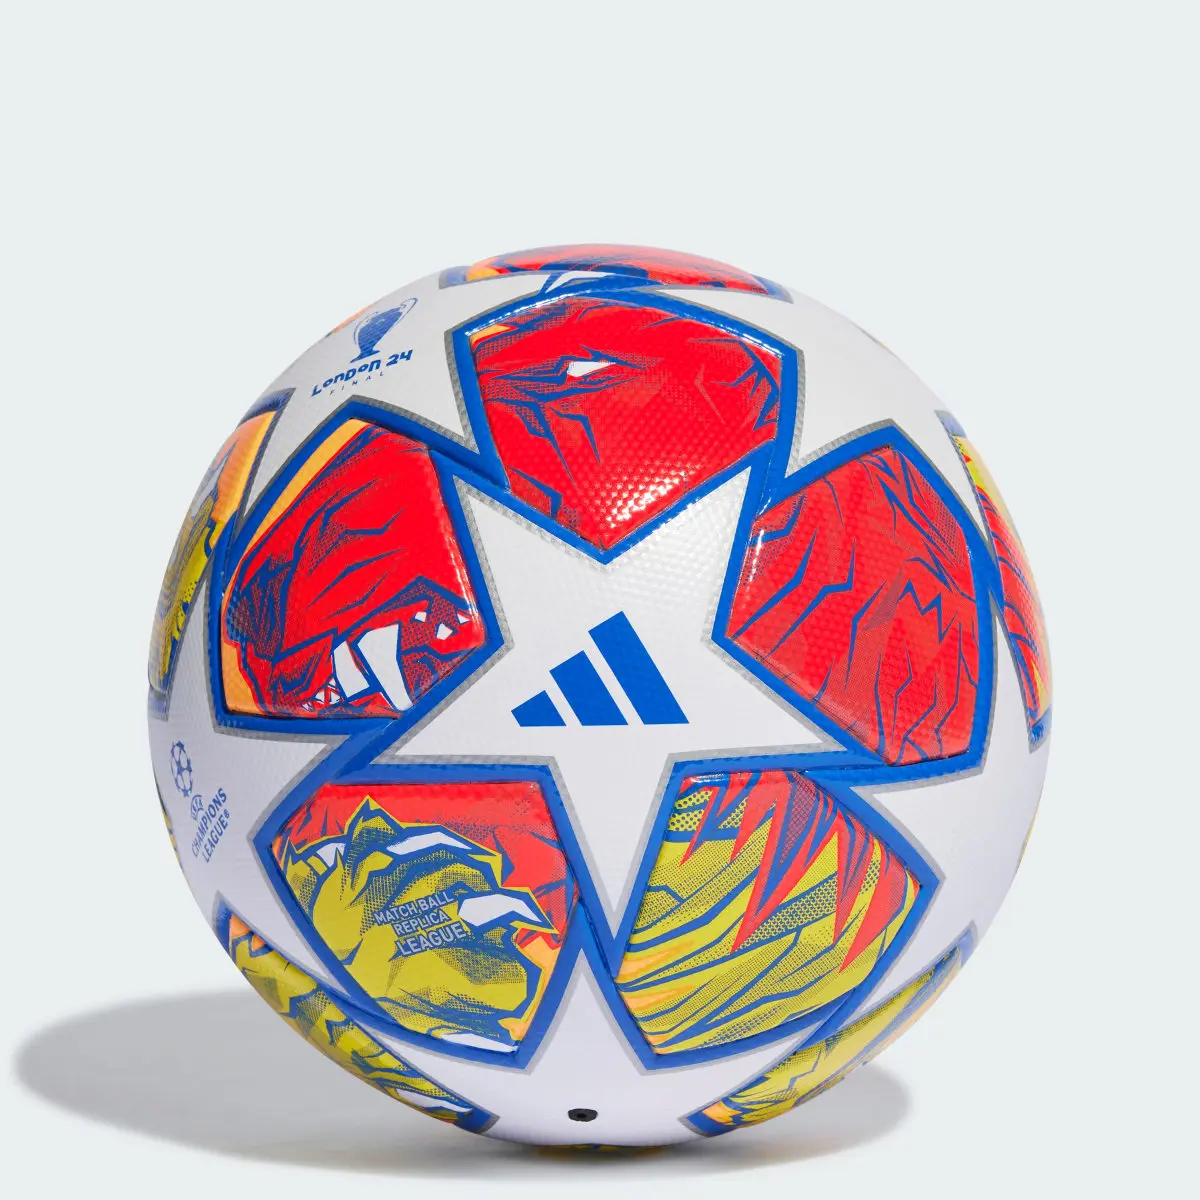 Adidas UCL League 23/24 Knock-out Ball. 1